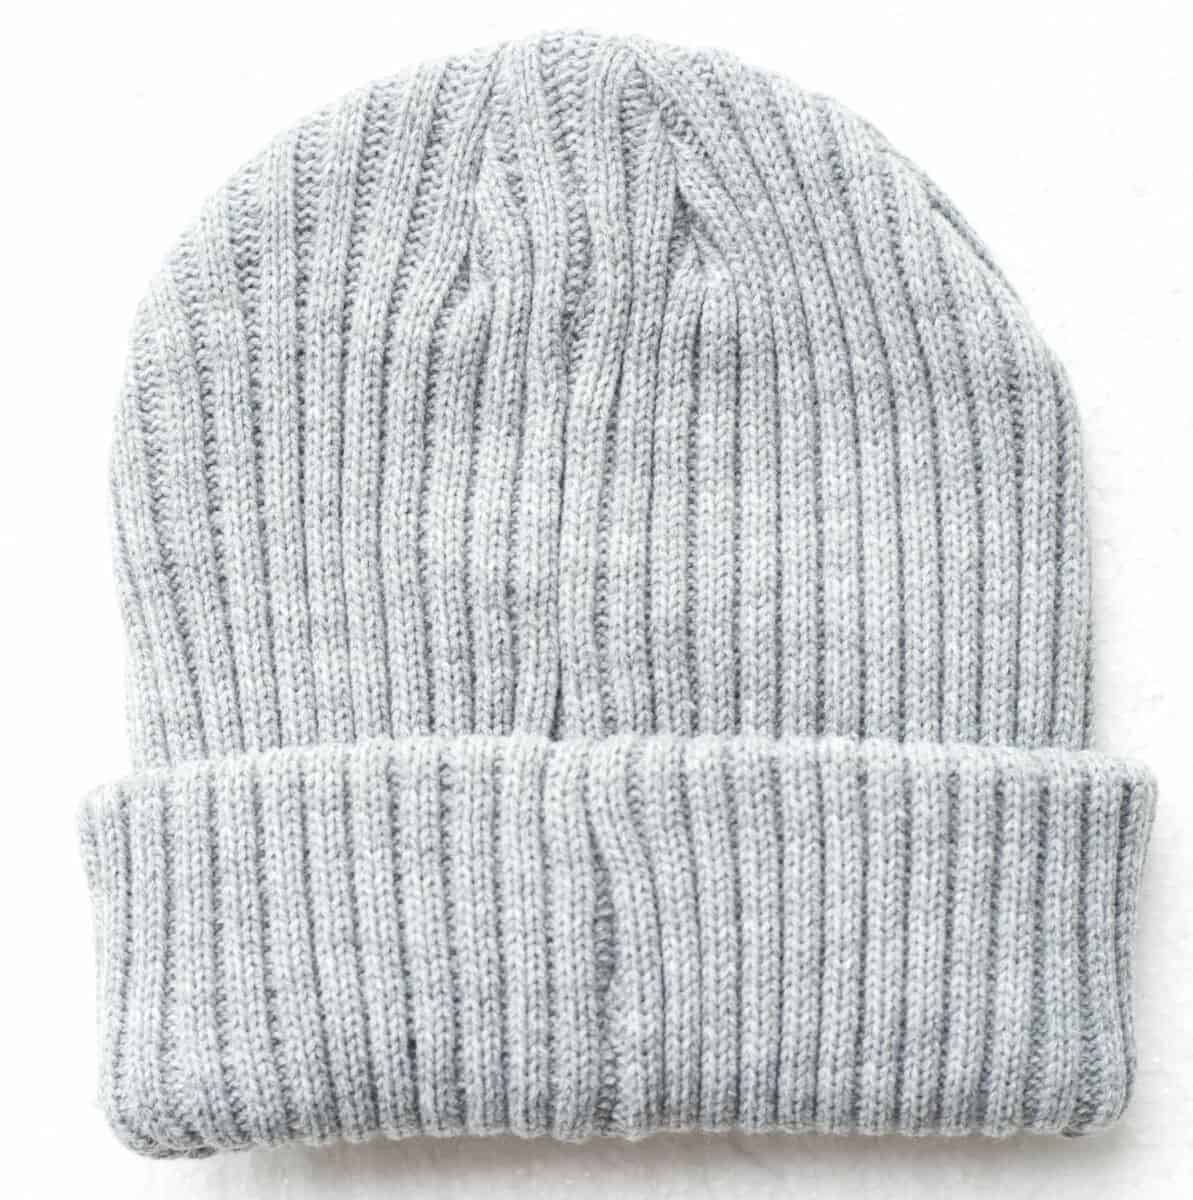 Professional Beanie Hat Maker, The Scarf & Hat Factory